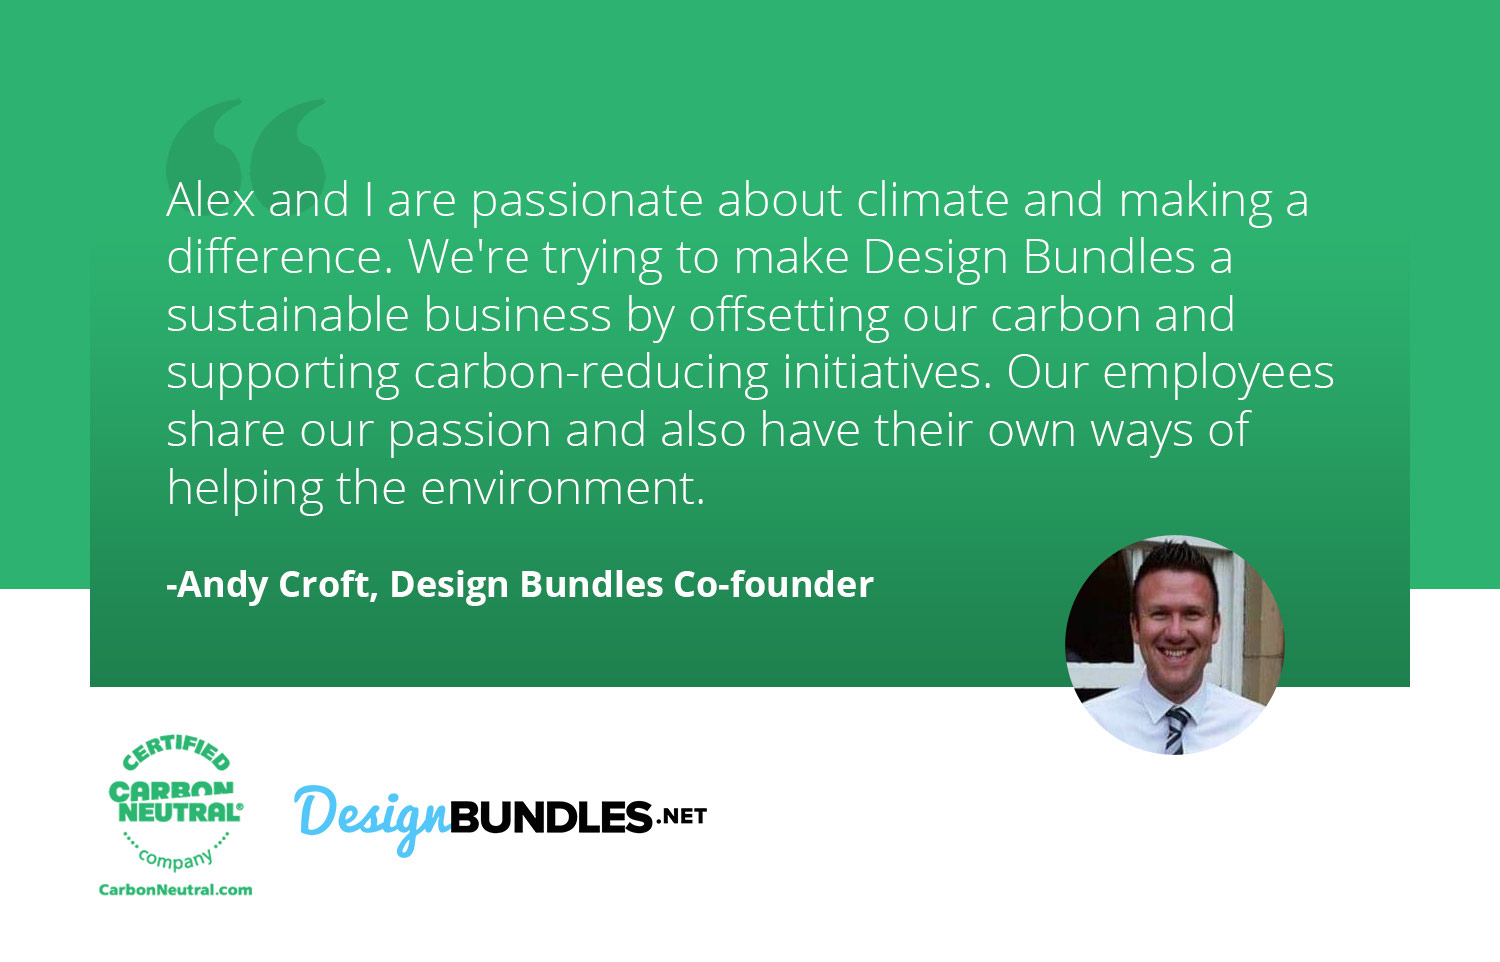 Quote from Andy Croft, Design Bundles Co-Founder about Design Bundles being a Carbon Neutral company